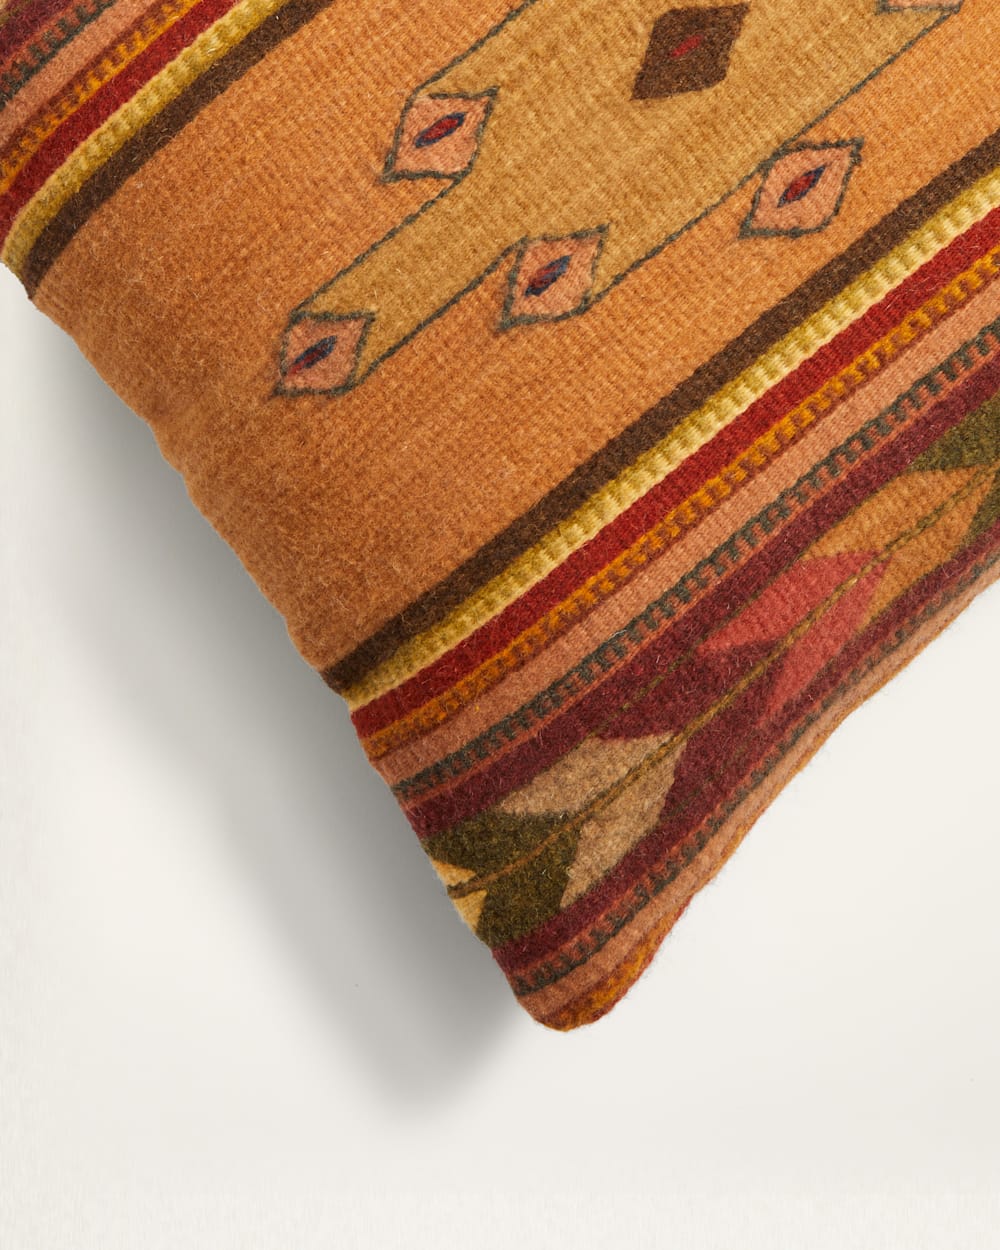 ALTERNATE VIEW OF CLAY CANYON SQUARE PILLOW IN RUST/BEIGE/BROWN image number 2